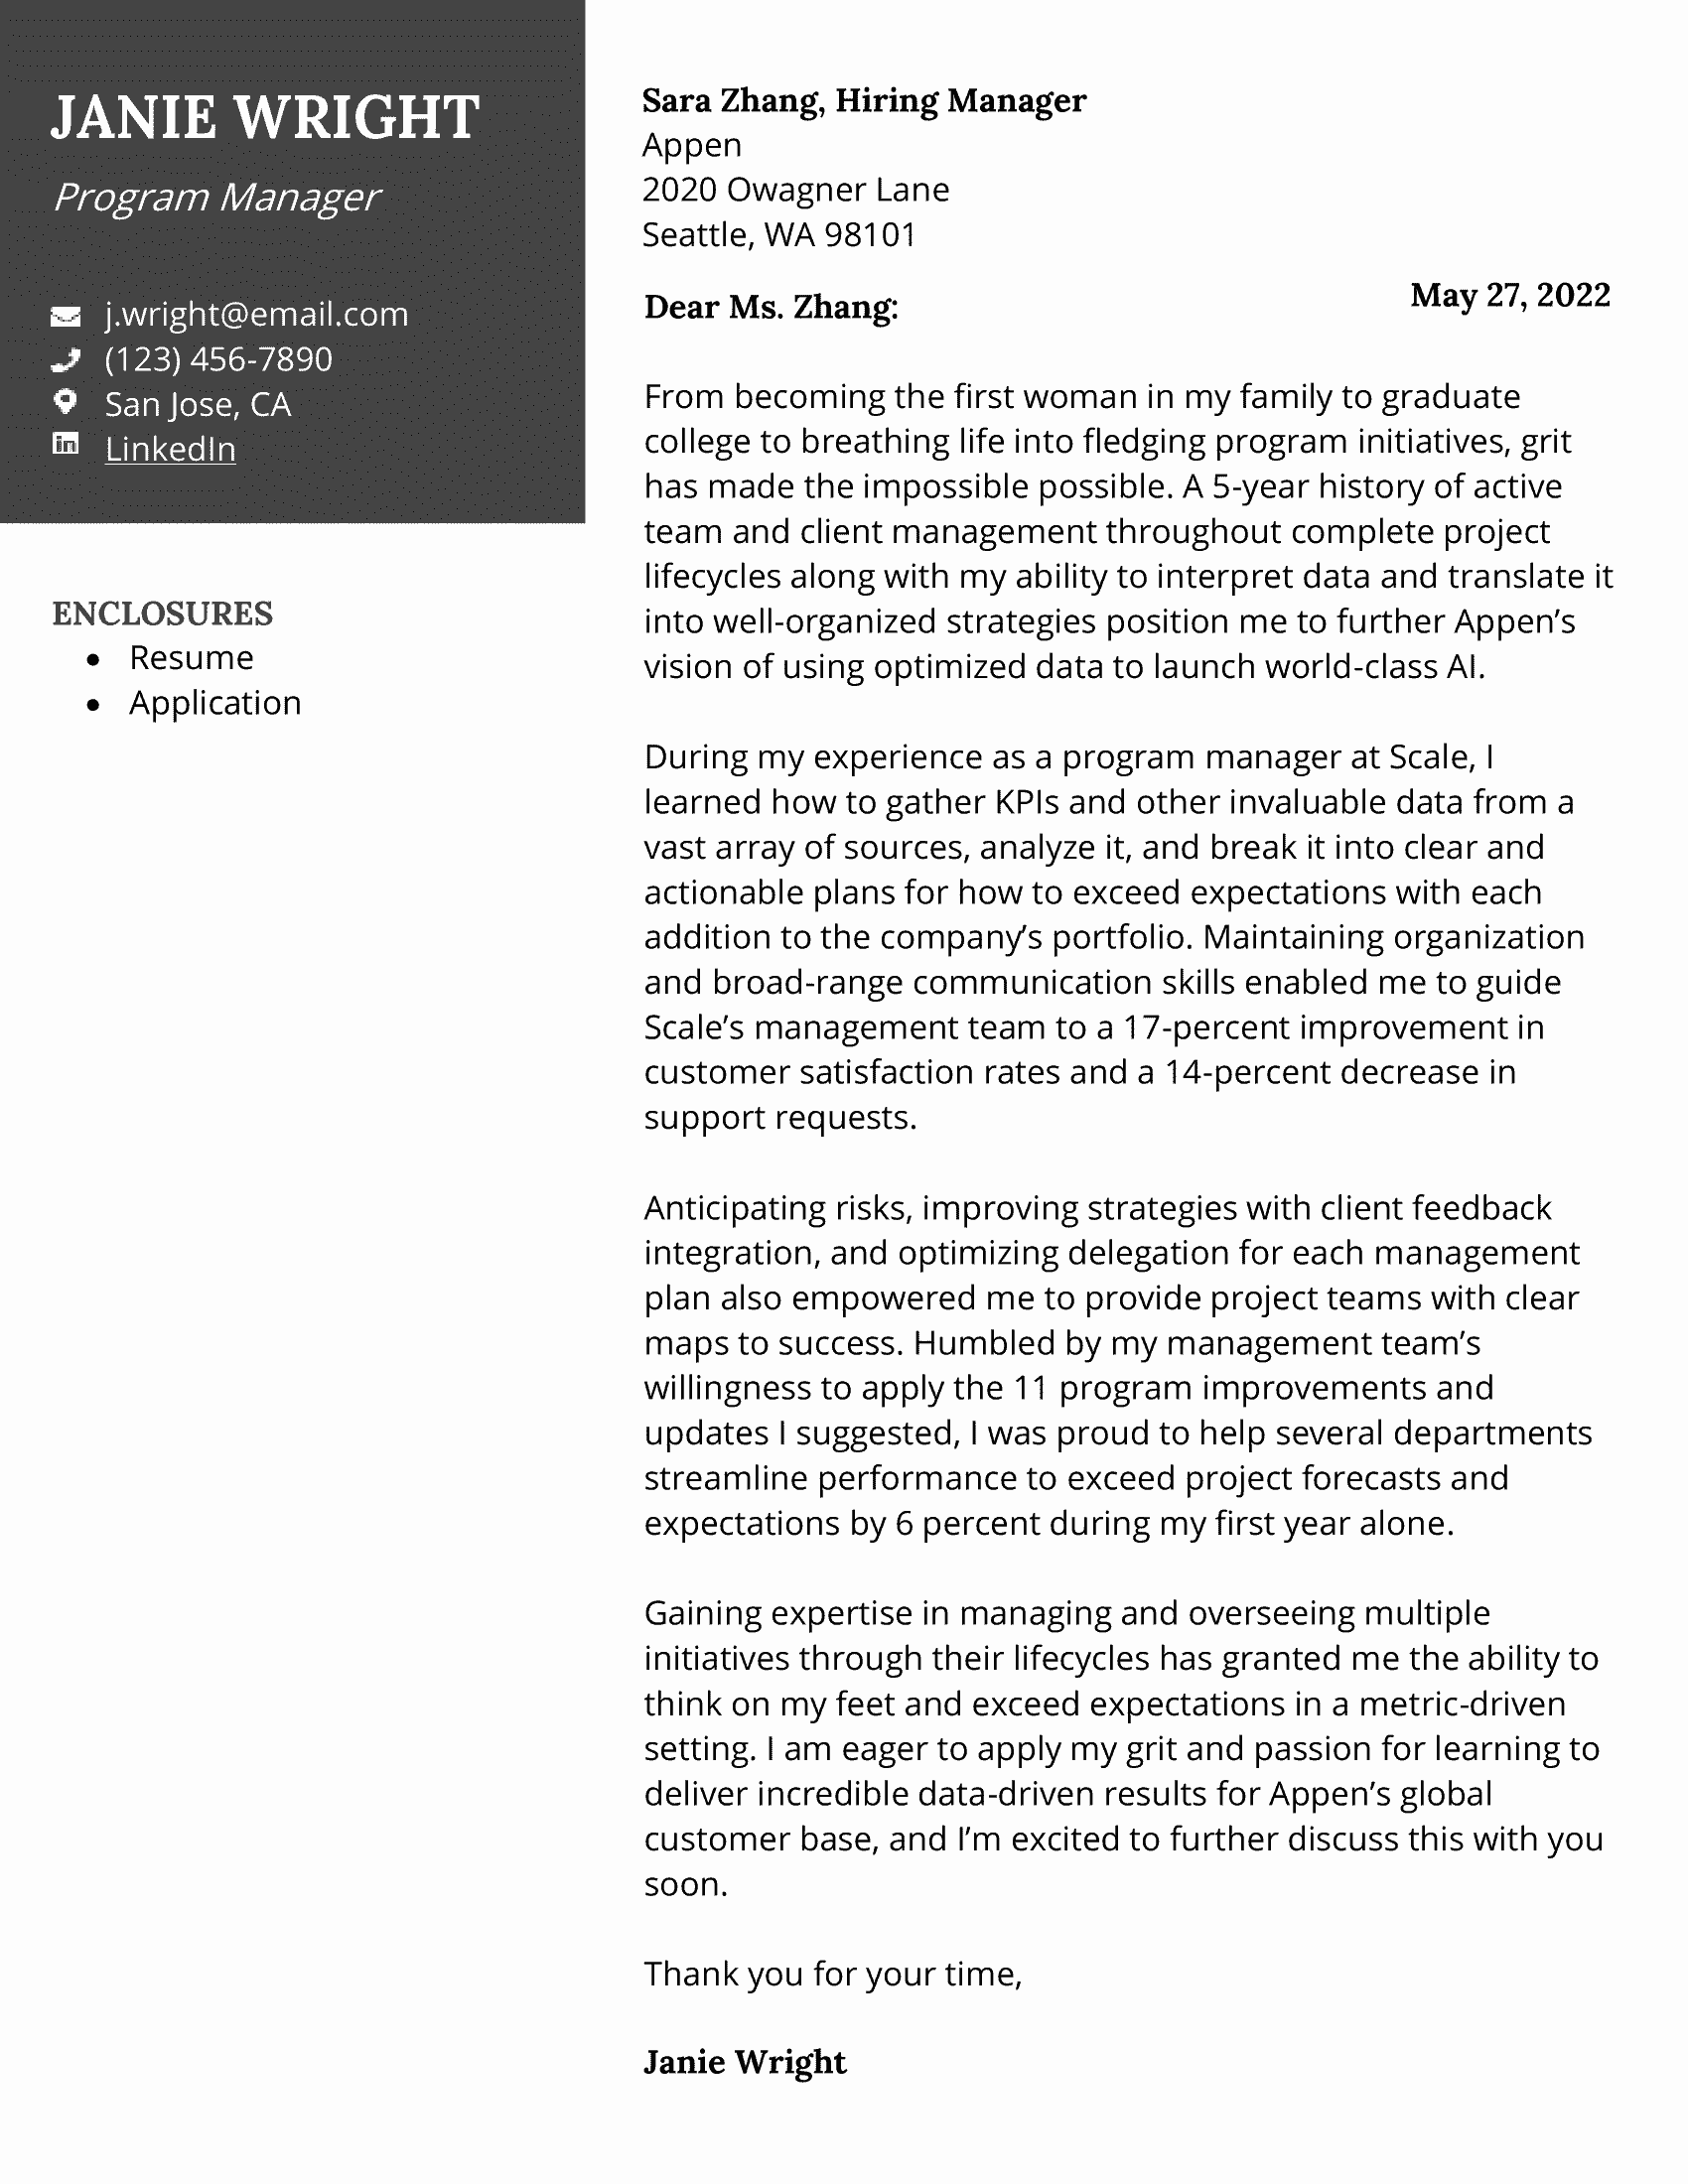 Program manager cover letter with black contact header 